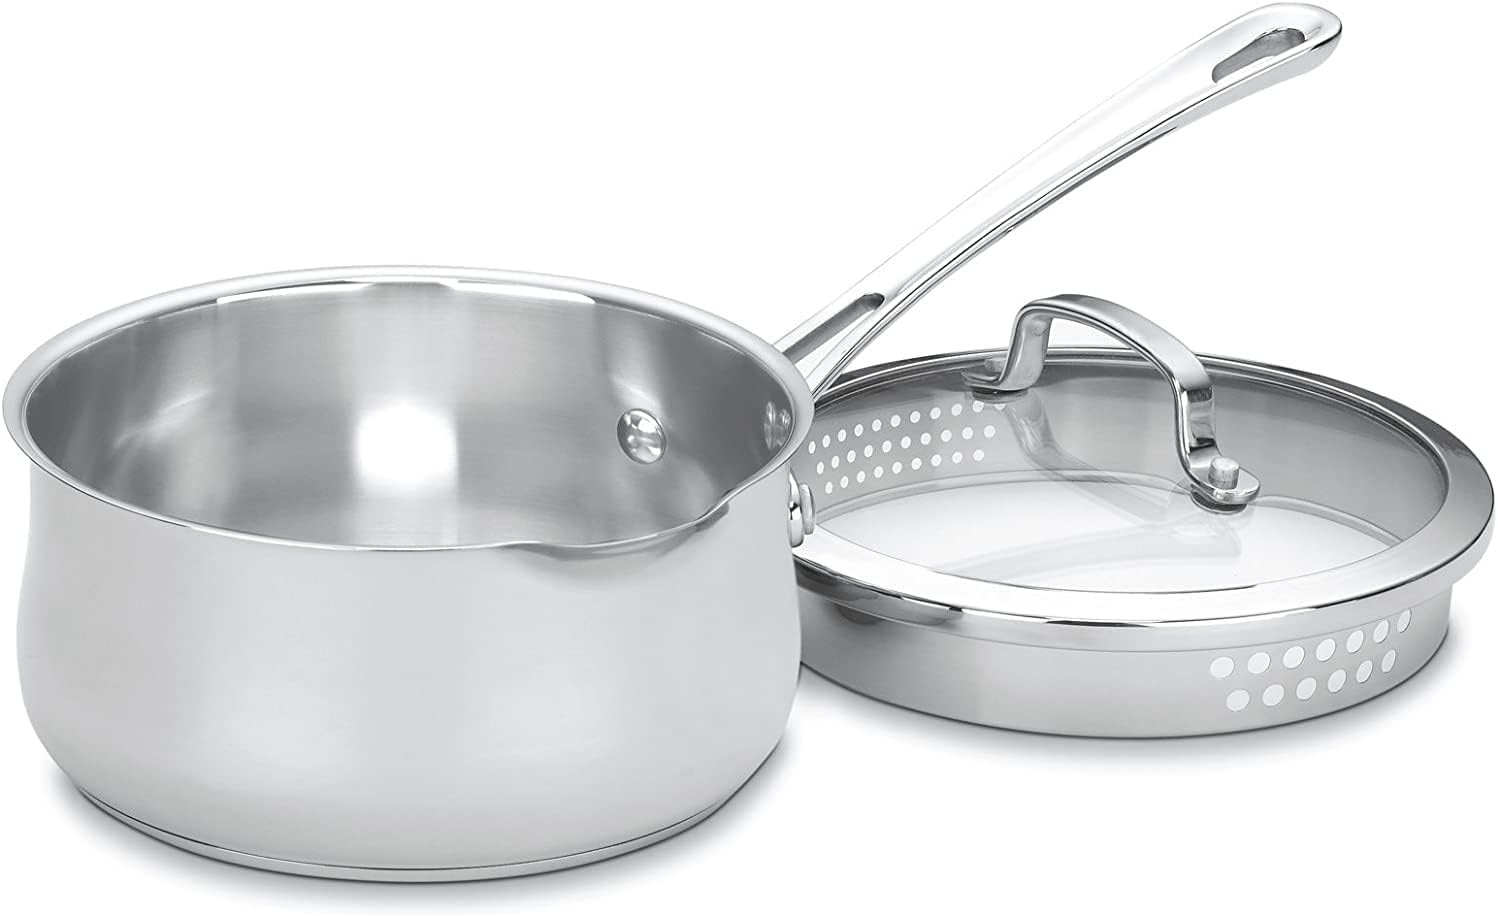 Cuisinart 419-18P 2-Quart Pour Saucepan with Cover Contour Cookware, Stainless Steel